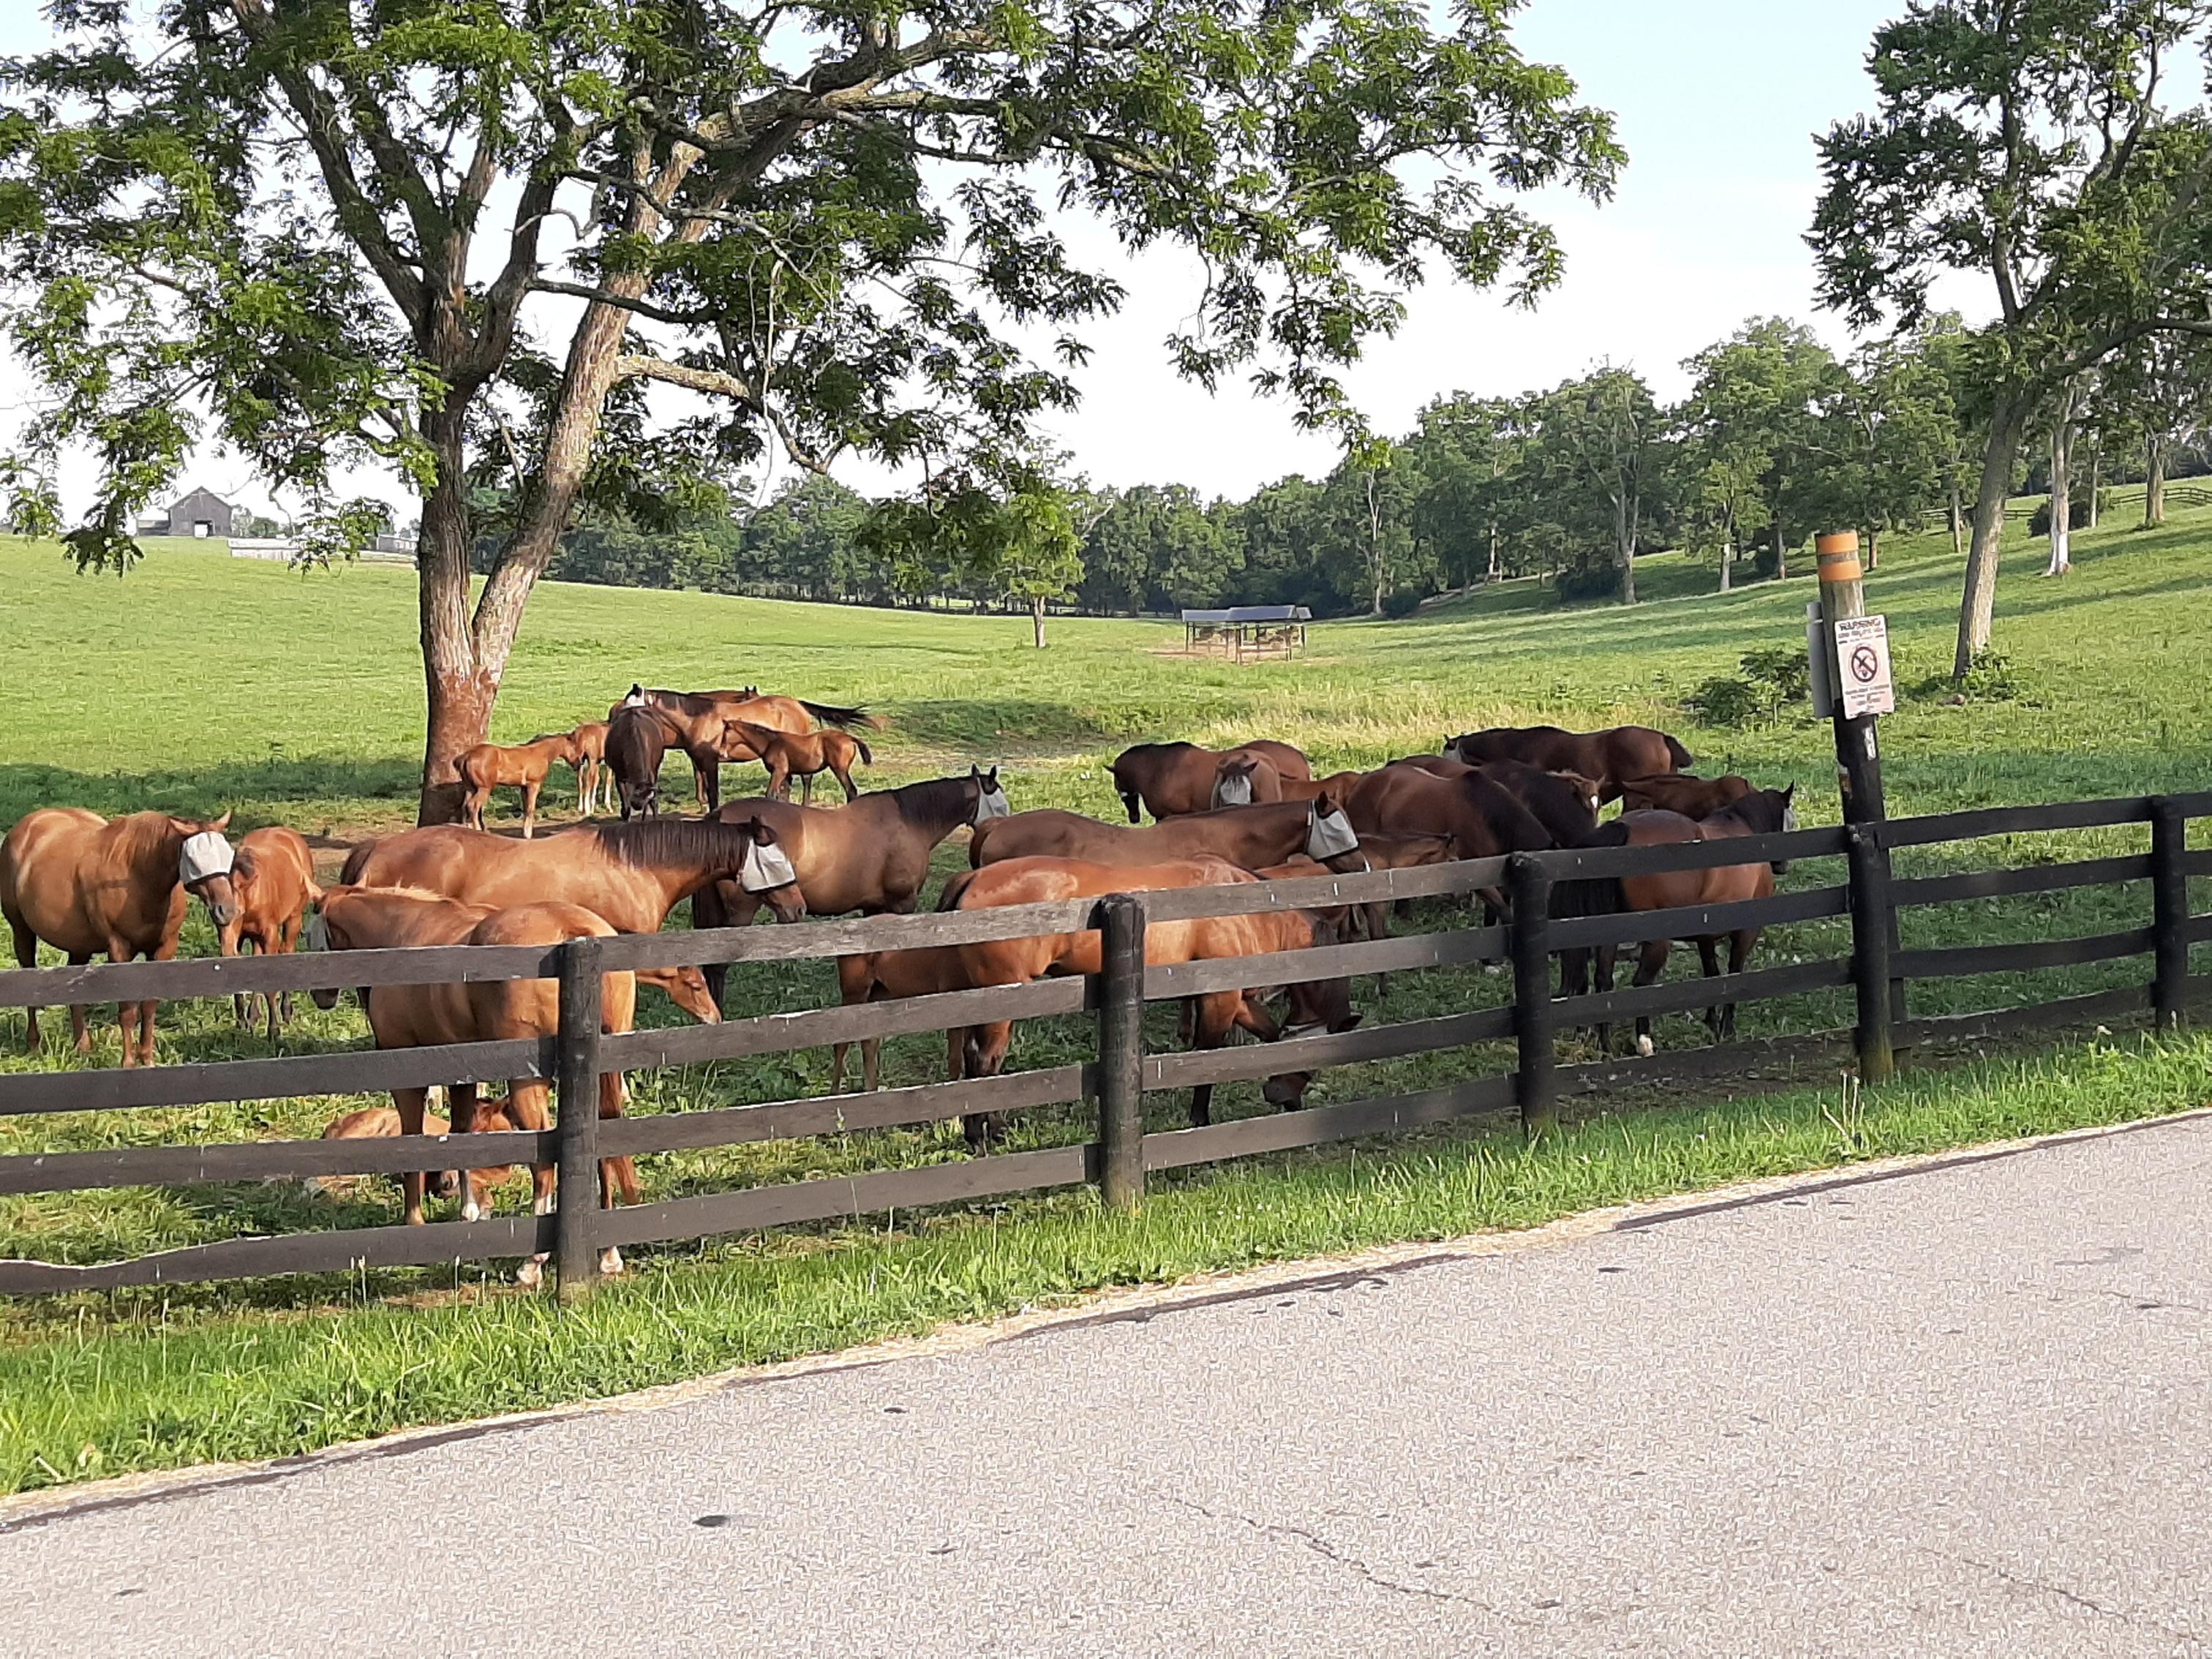 Multiple horses behind fence